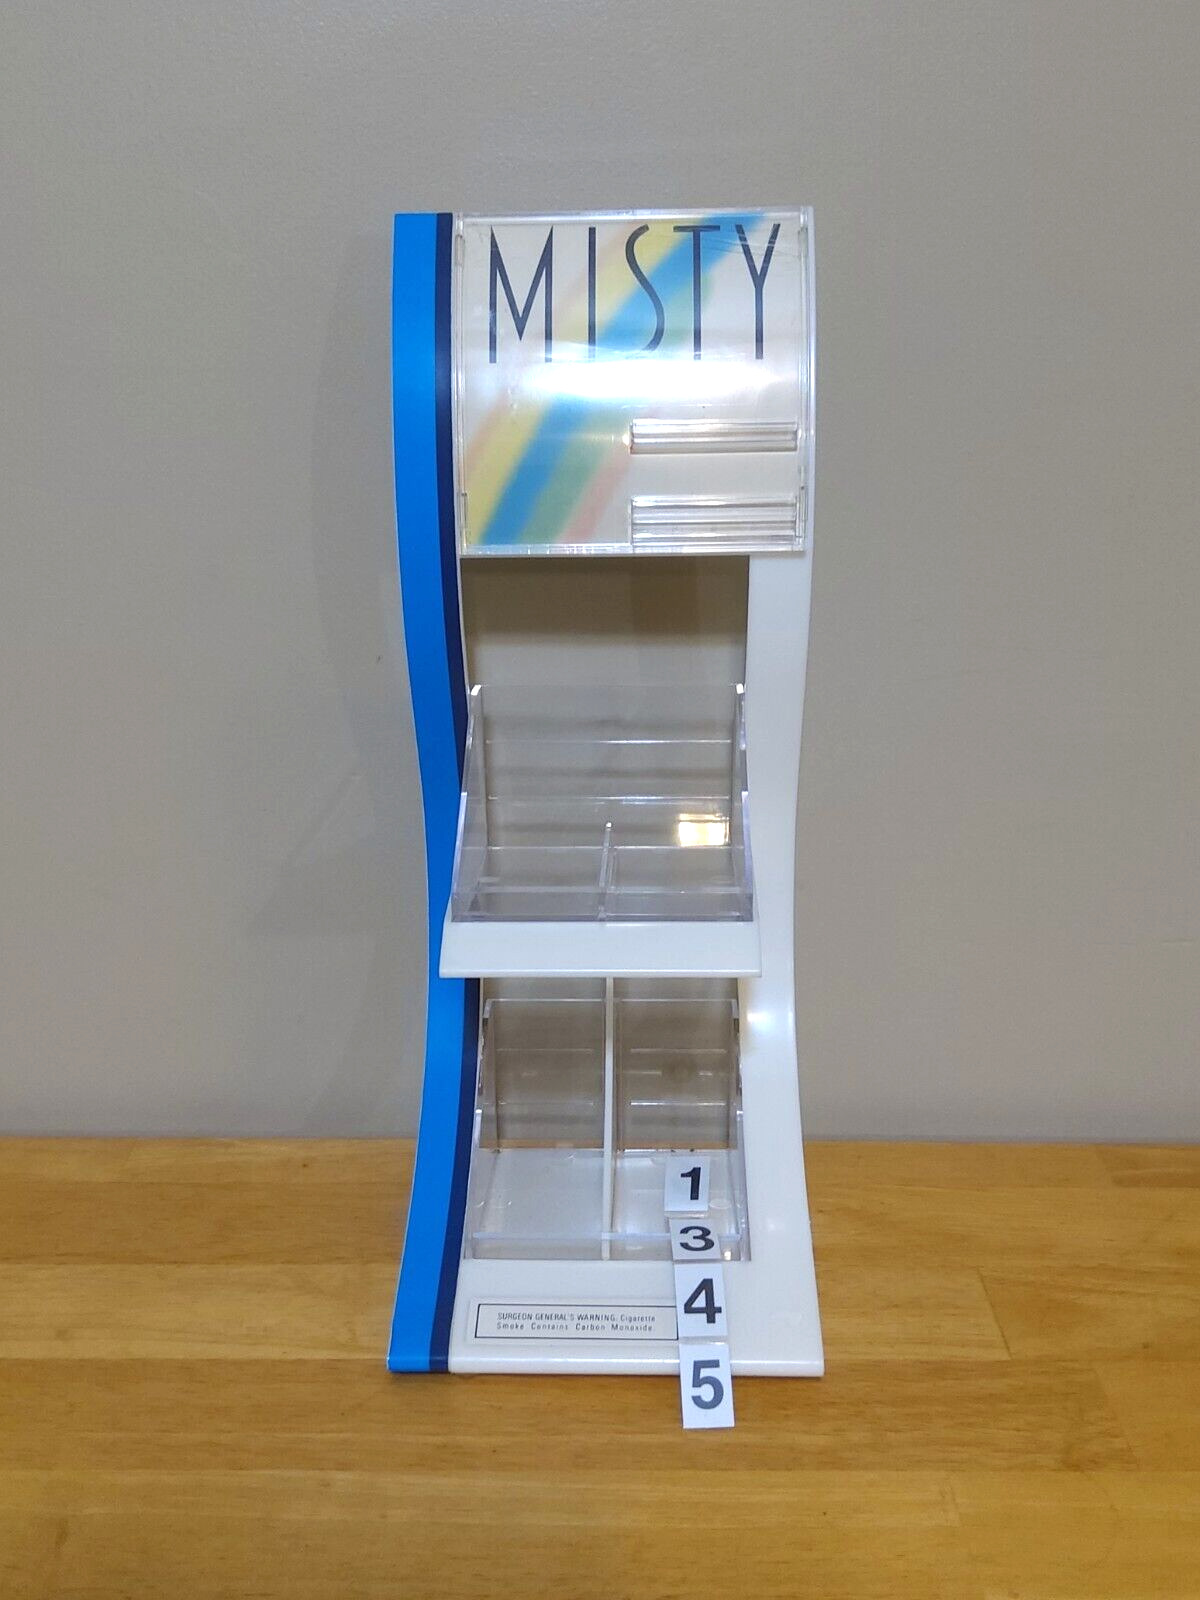 Vintage 1995 Misty Cigarettes Counter Top Display Case With Price Numbers